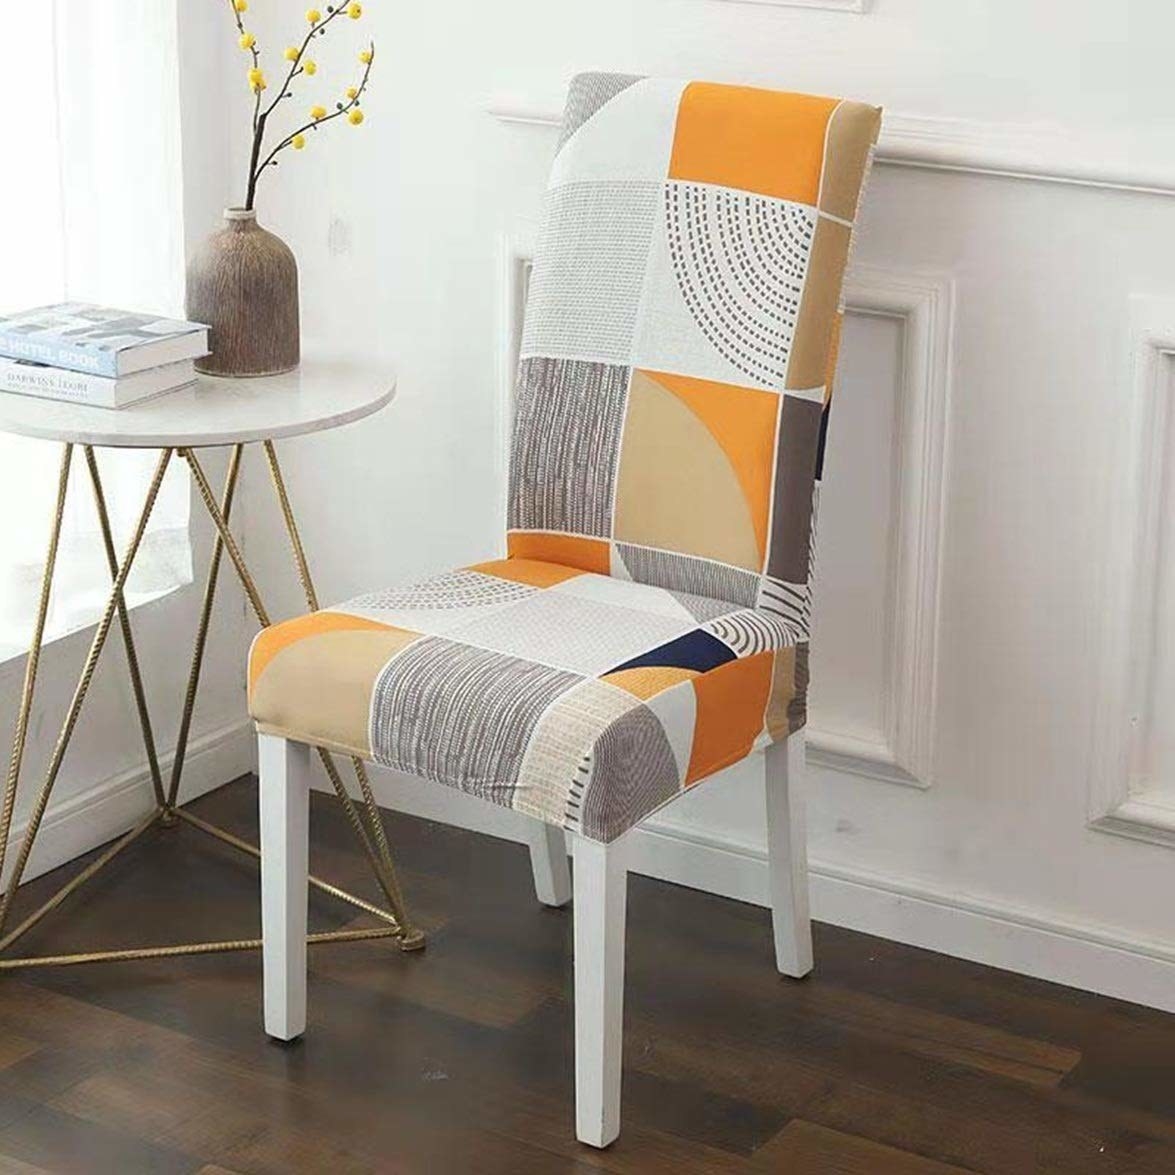 A chair covered with an orange and black slip cover with big checkers and an abstract design